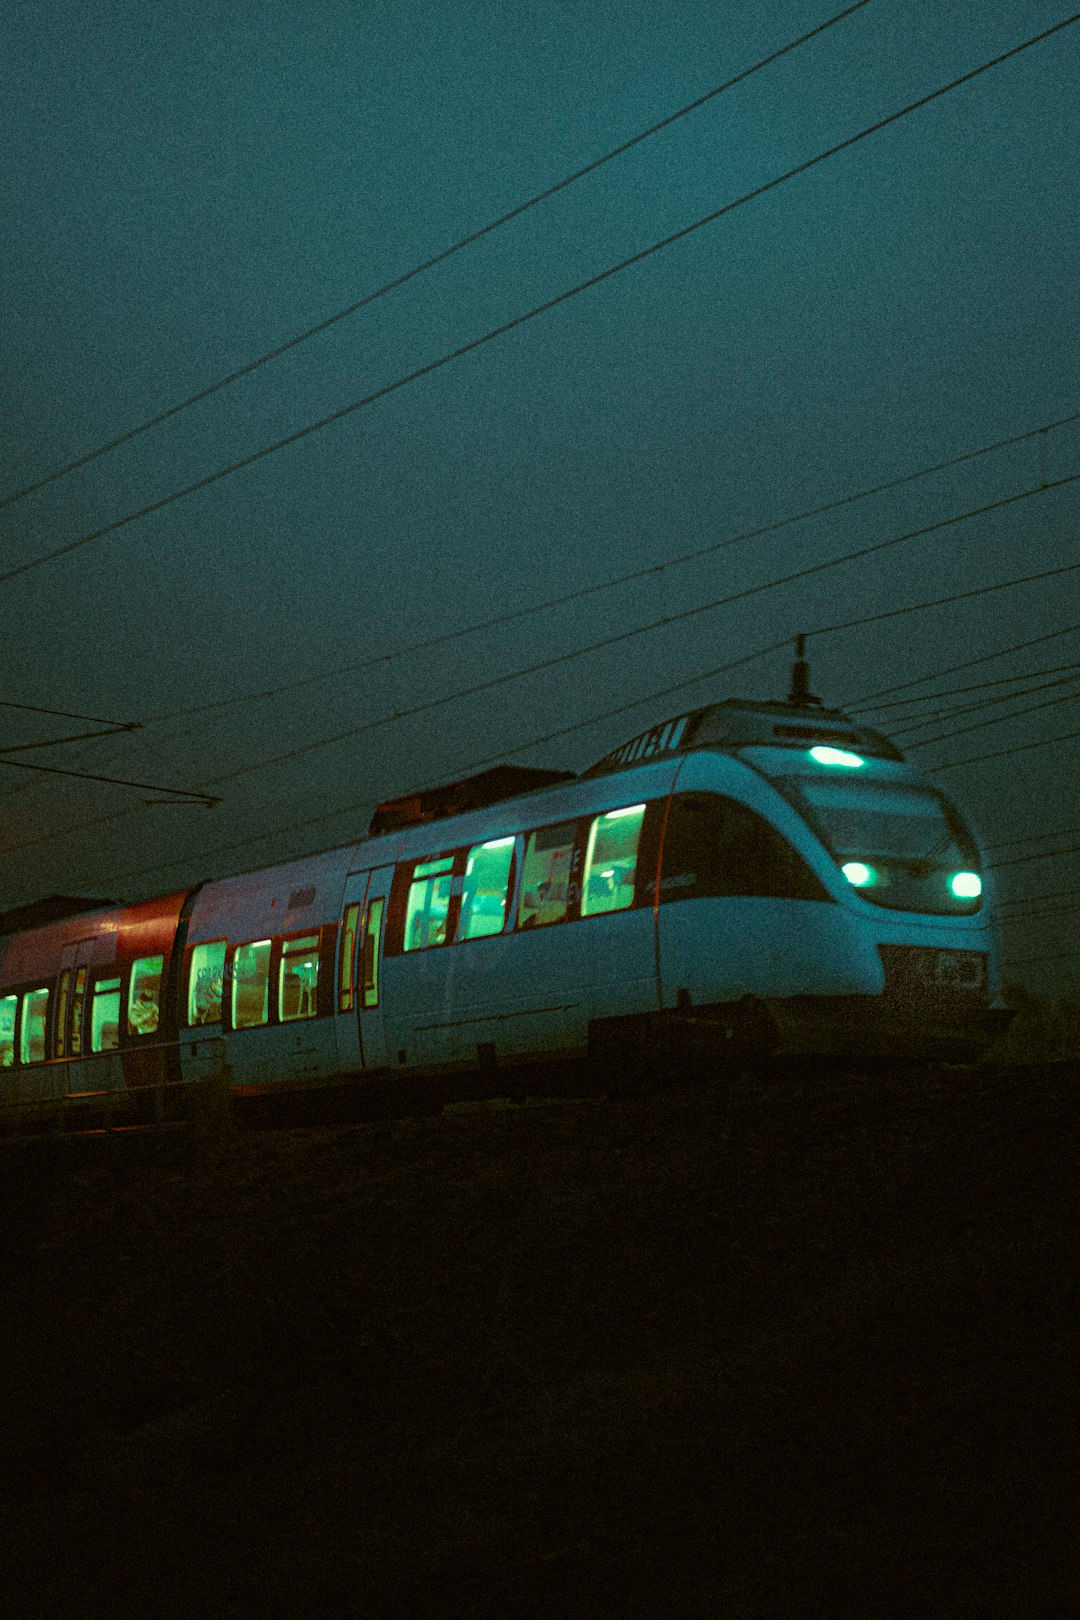 white and blue train on rail during night time